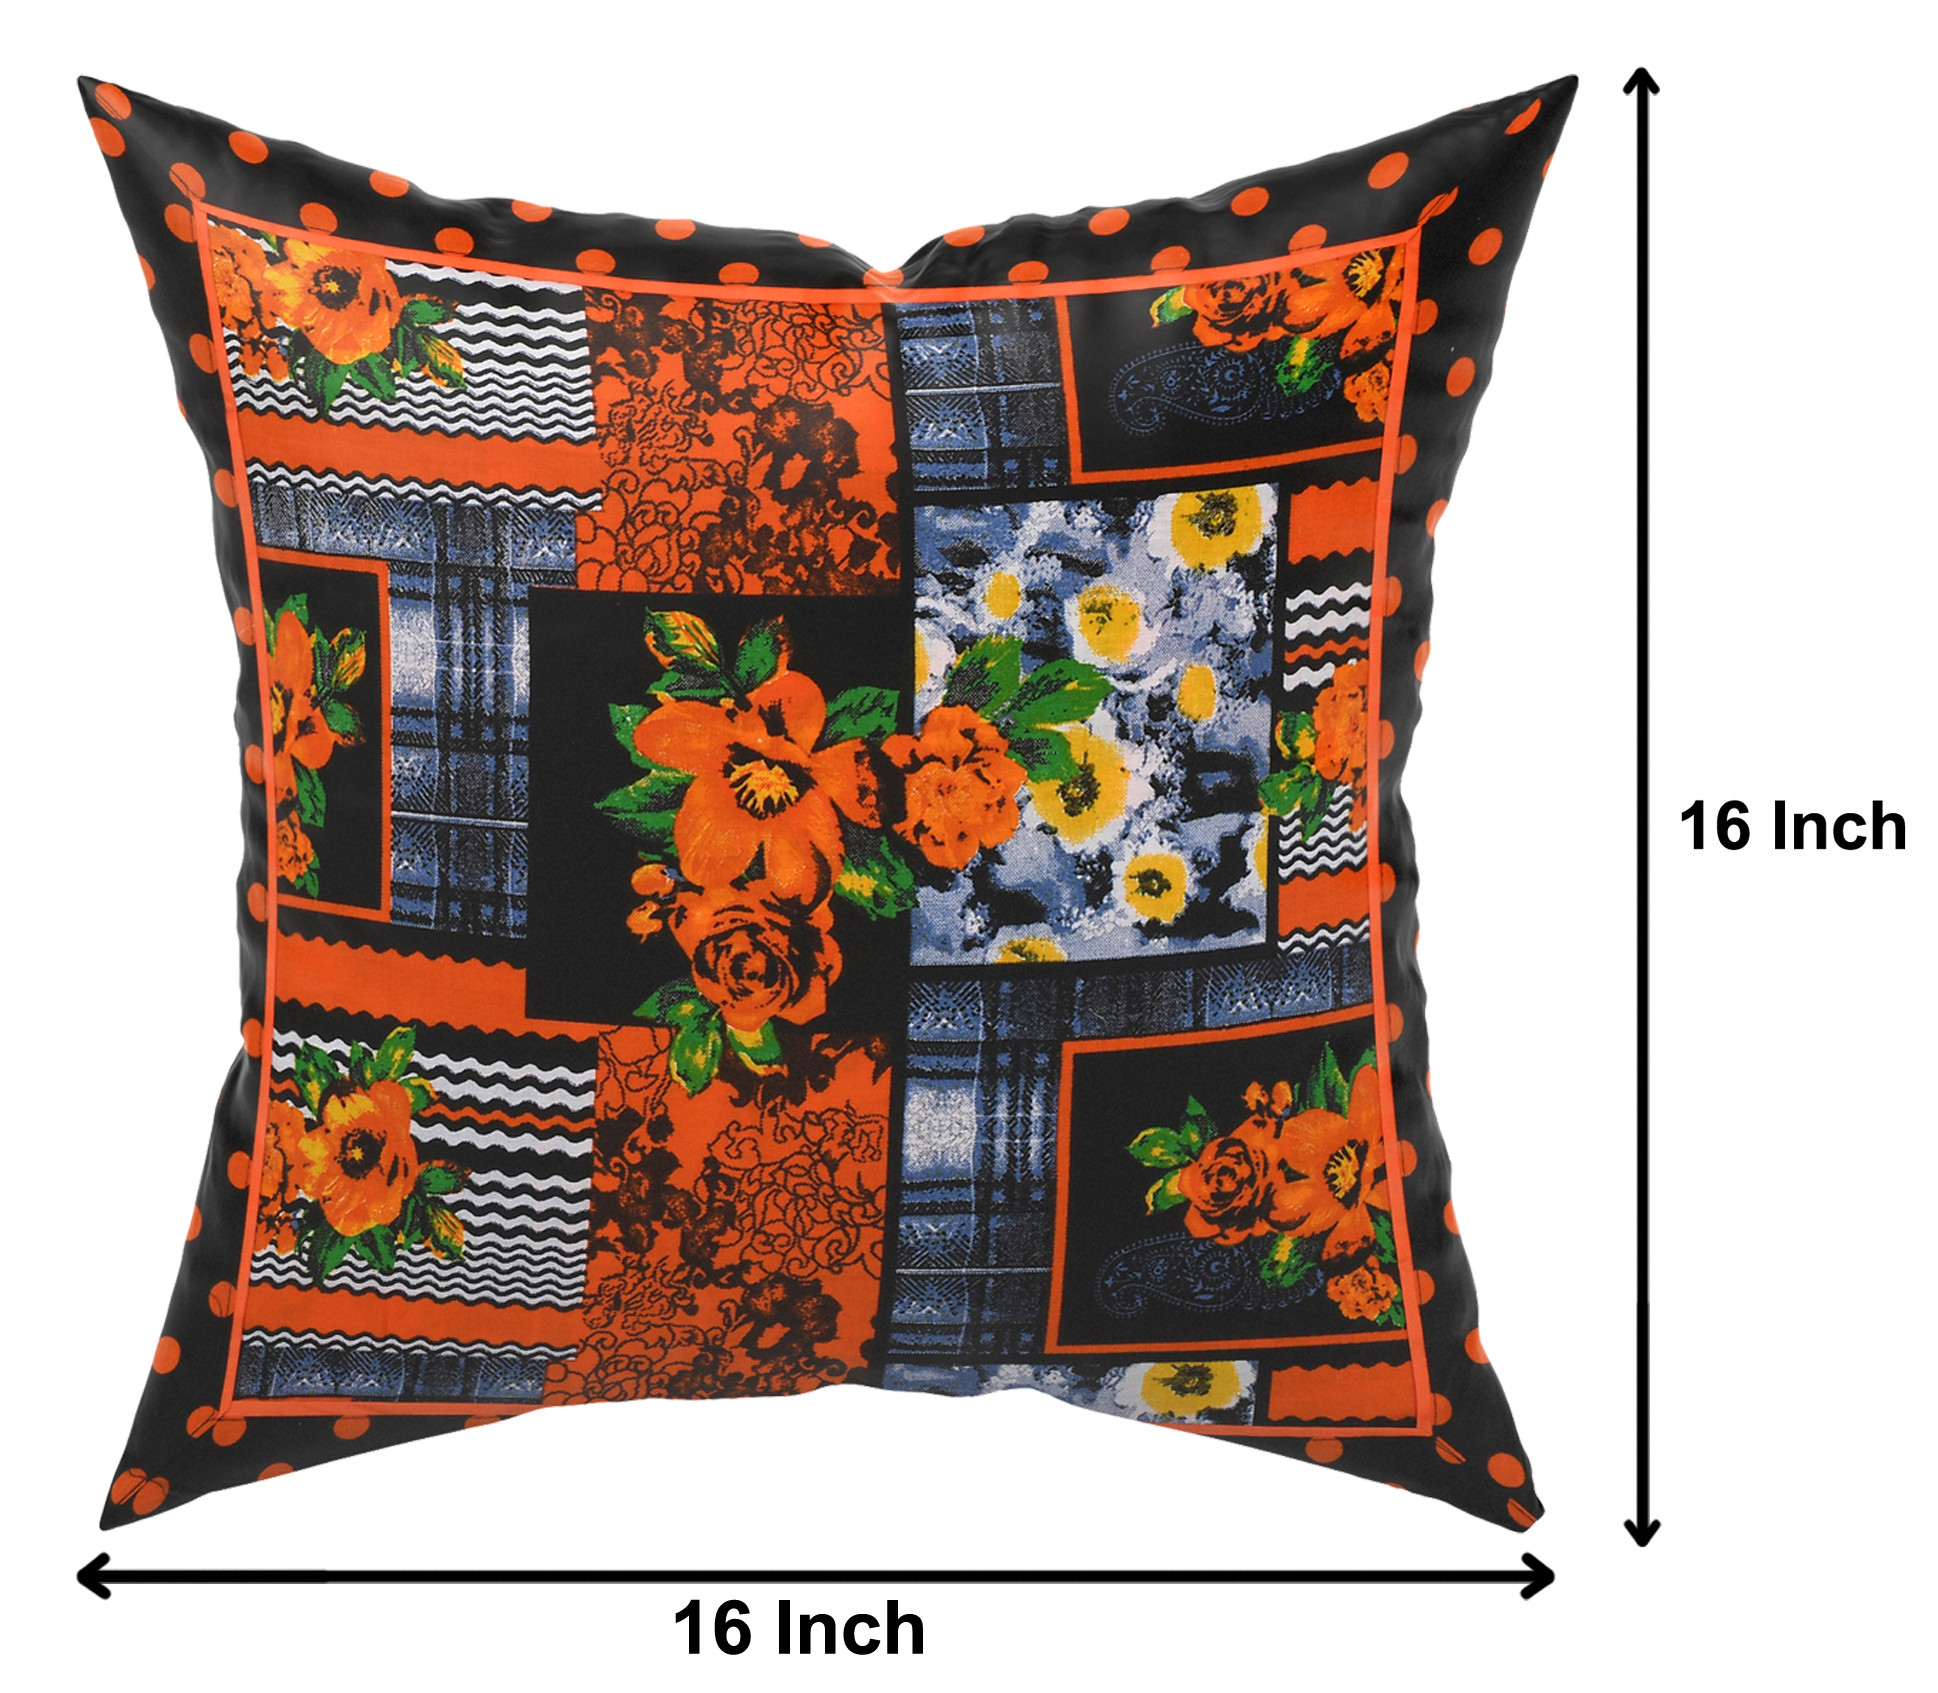 Kuber Industries Floral Print Cotton Abstract Decorative Throw Pillow/Cushion Covers 16